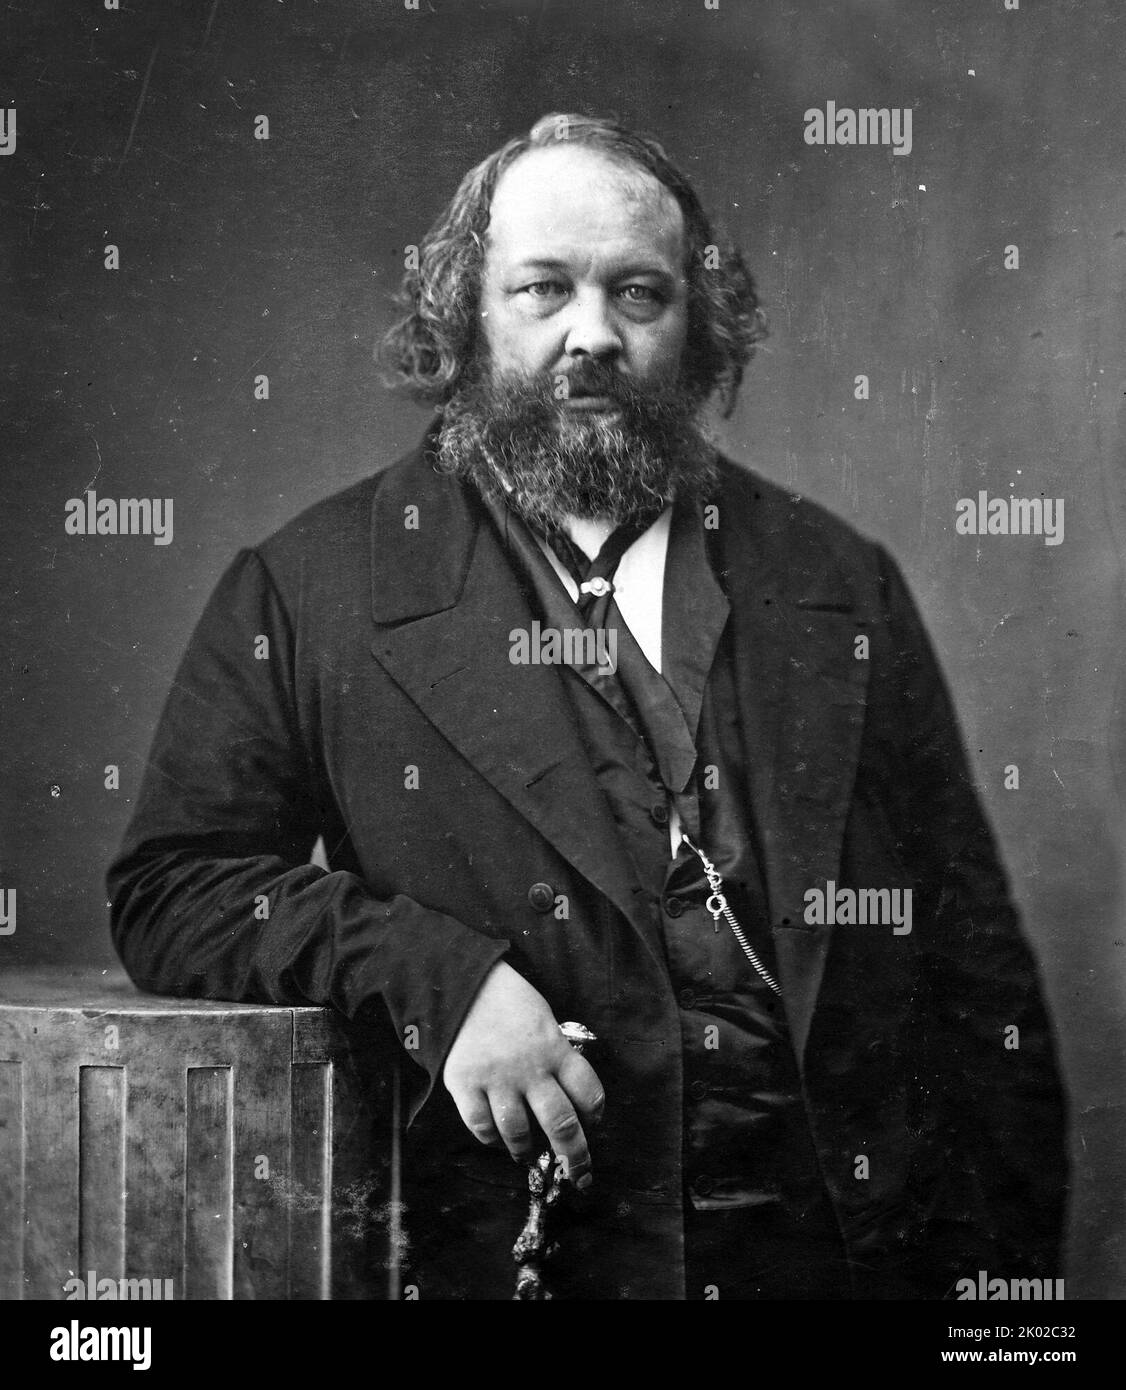 Mikhail Alexandrovich Bakunin (1814 - 1876); Russian revolutionary anarchist, socialist and founder of collectivist anarchism. He is considered among the most influential figures of anarchism and a major founder of the revolutionary socialist and social anarchist tradition Stock Photo